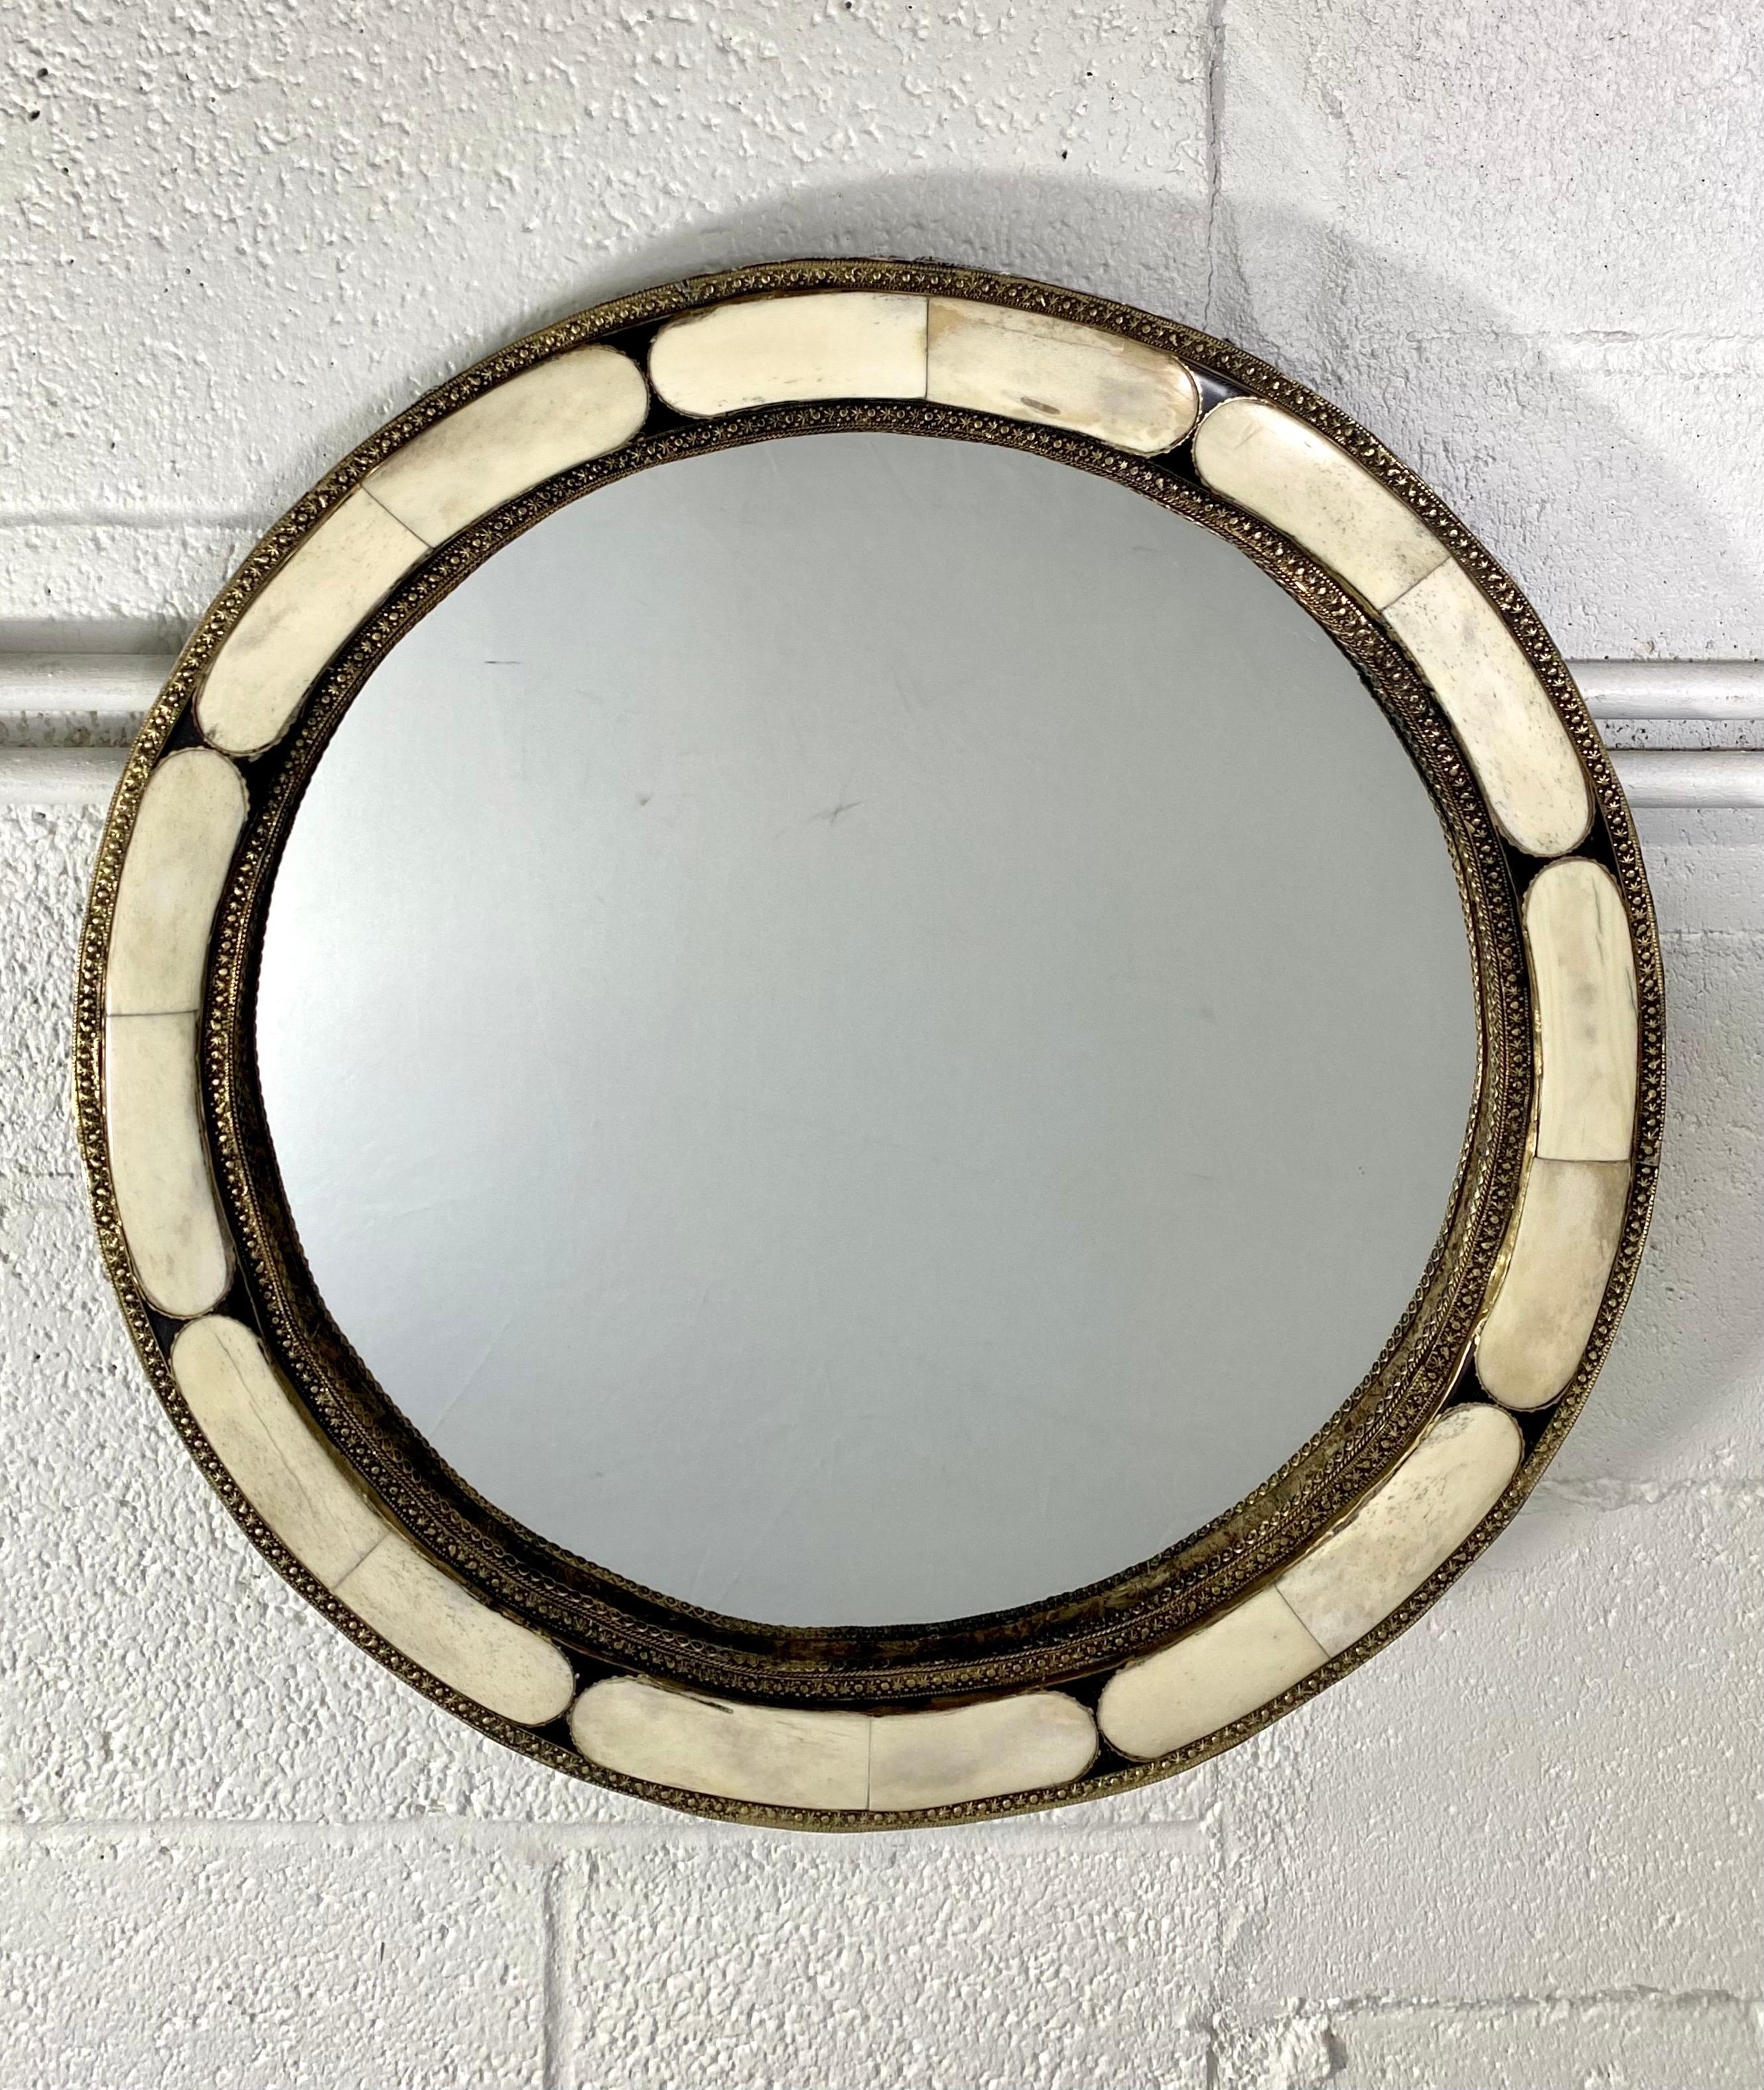 A stylish pair of White Round Mirrors in Hollywood Regency Style. Handcrafted with bone and brass inlay and featuring beautiful design elements, this exquisite pair of mirrors brings a sense of robust elegance to any space.

Dimensions: 20